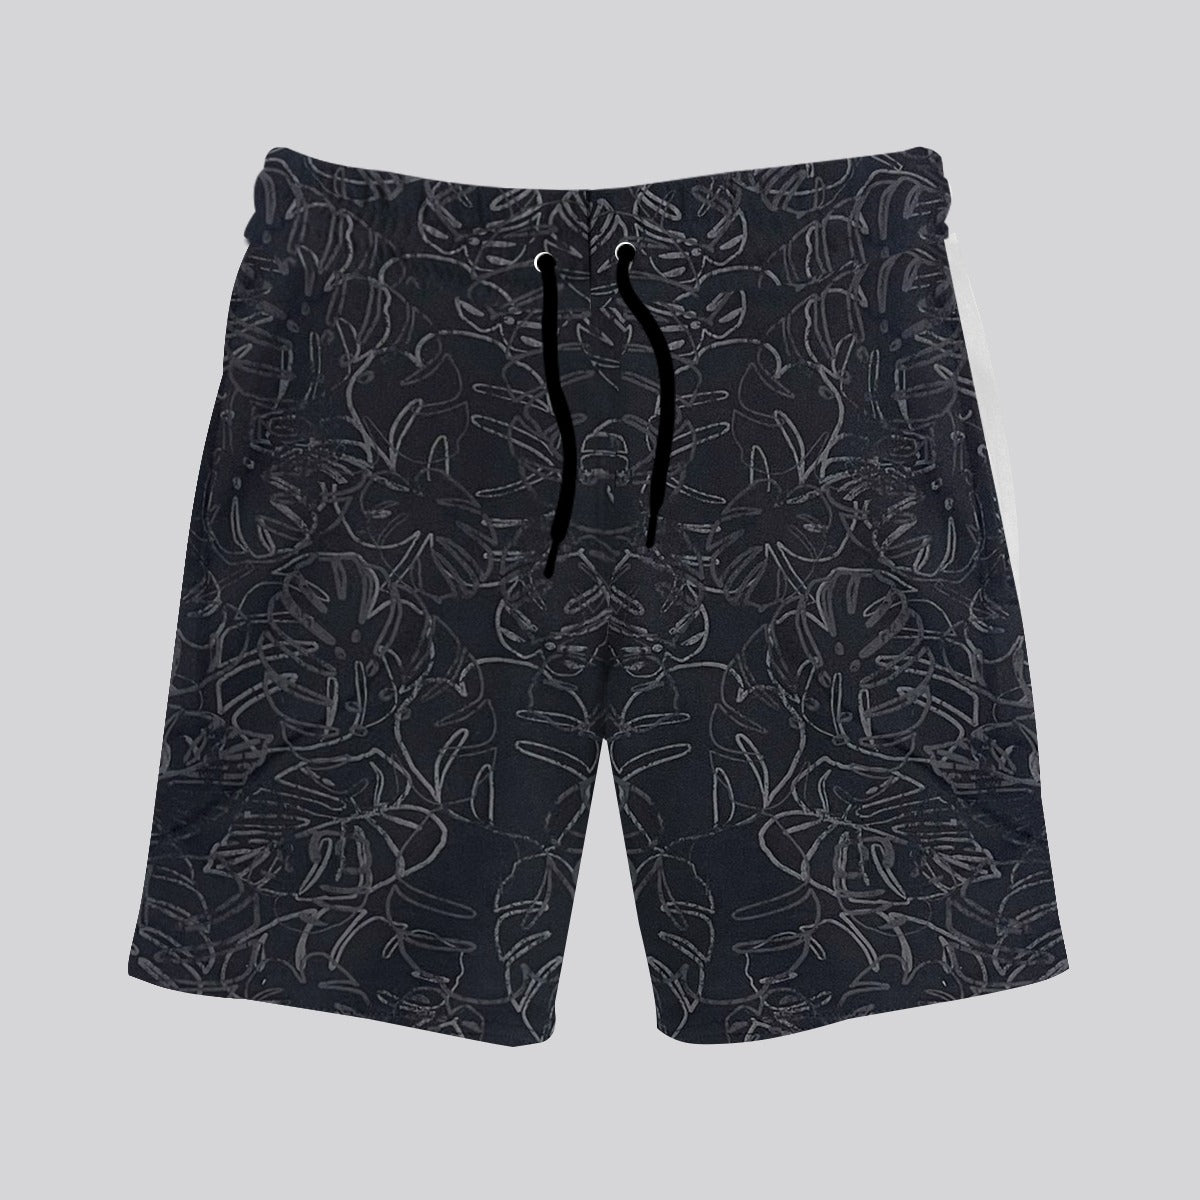 ALL OVER PRINTED TWO QUARTER SUMMER SHORTS